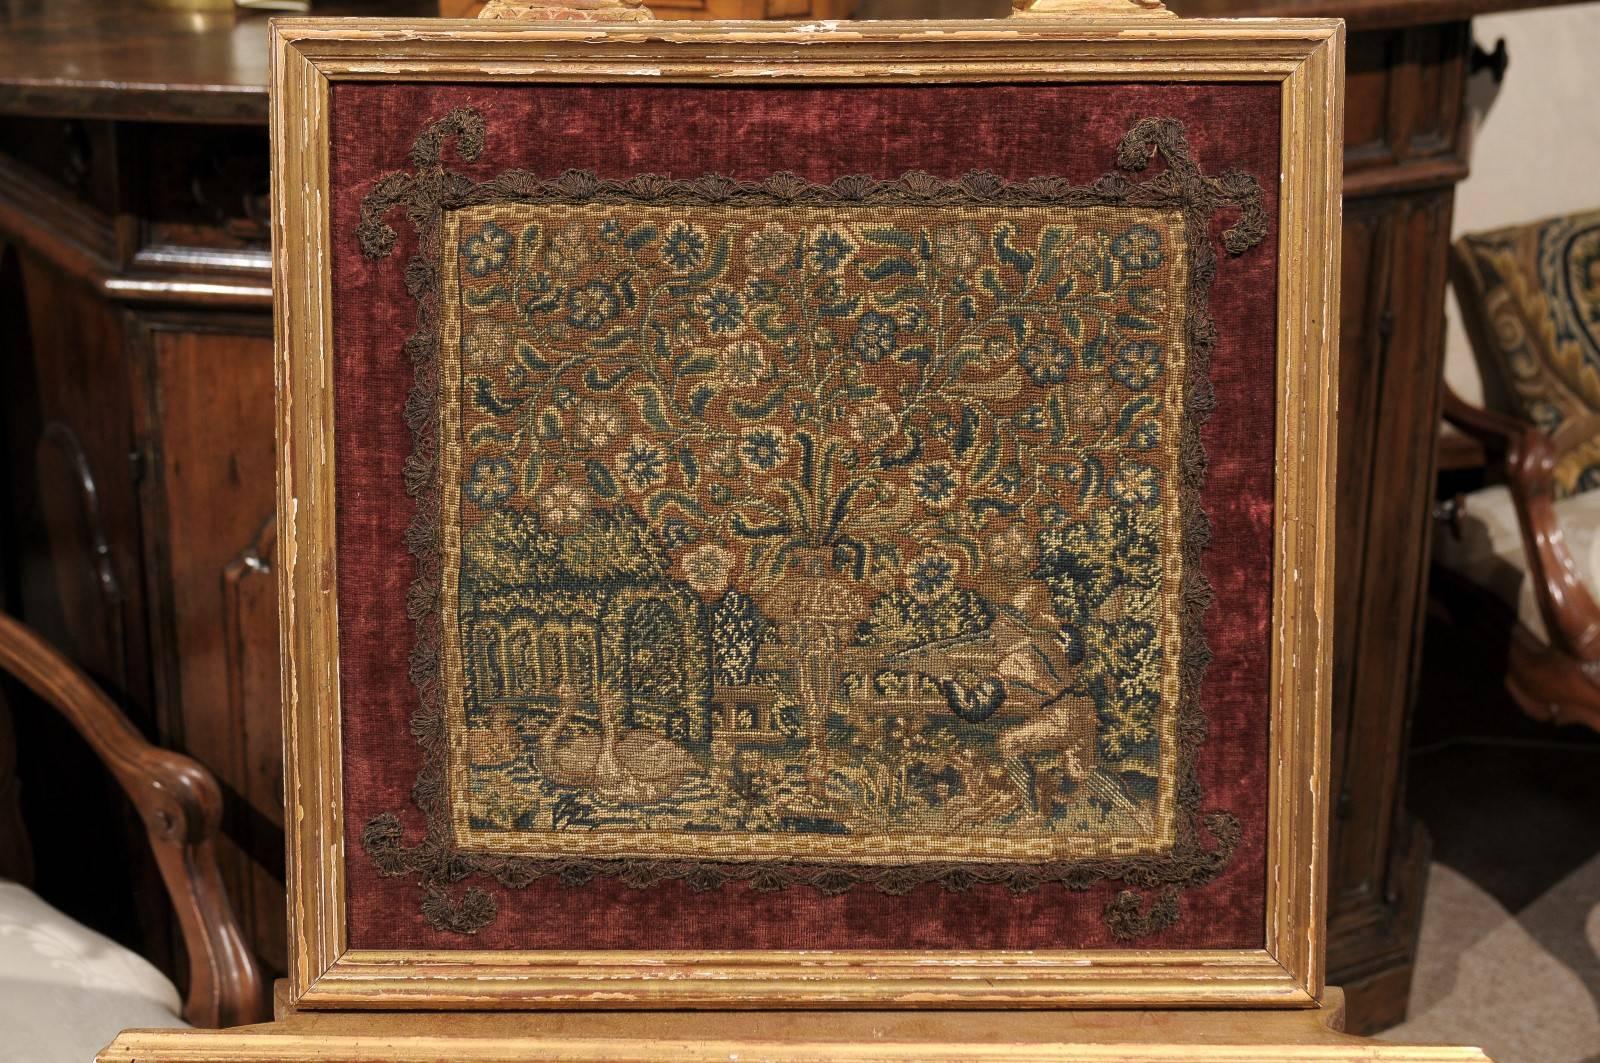 Pair of framed 17th century tapestries, Brussels.